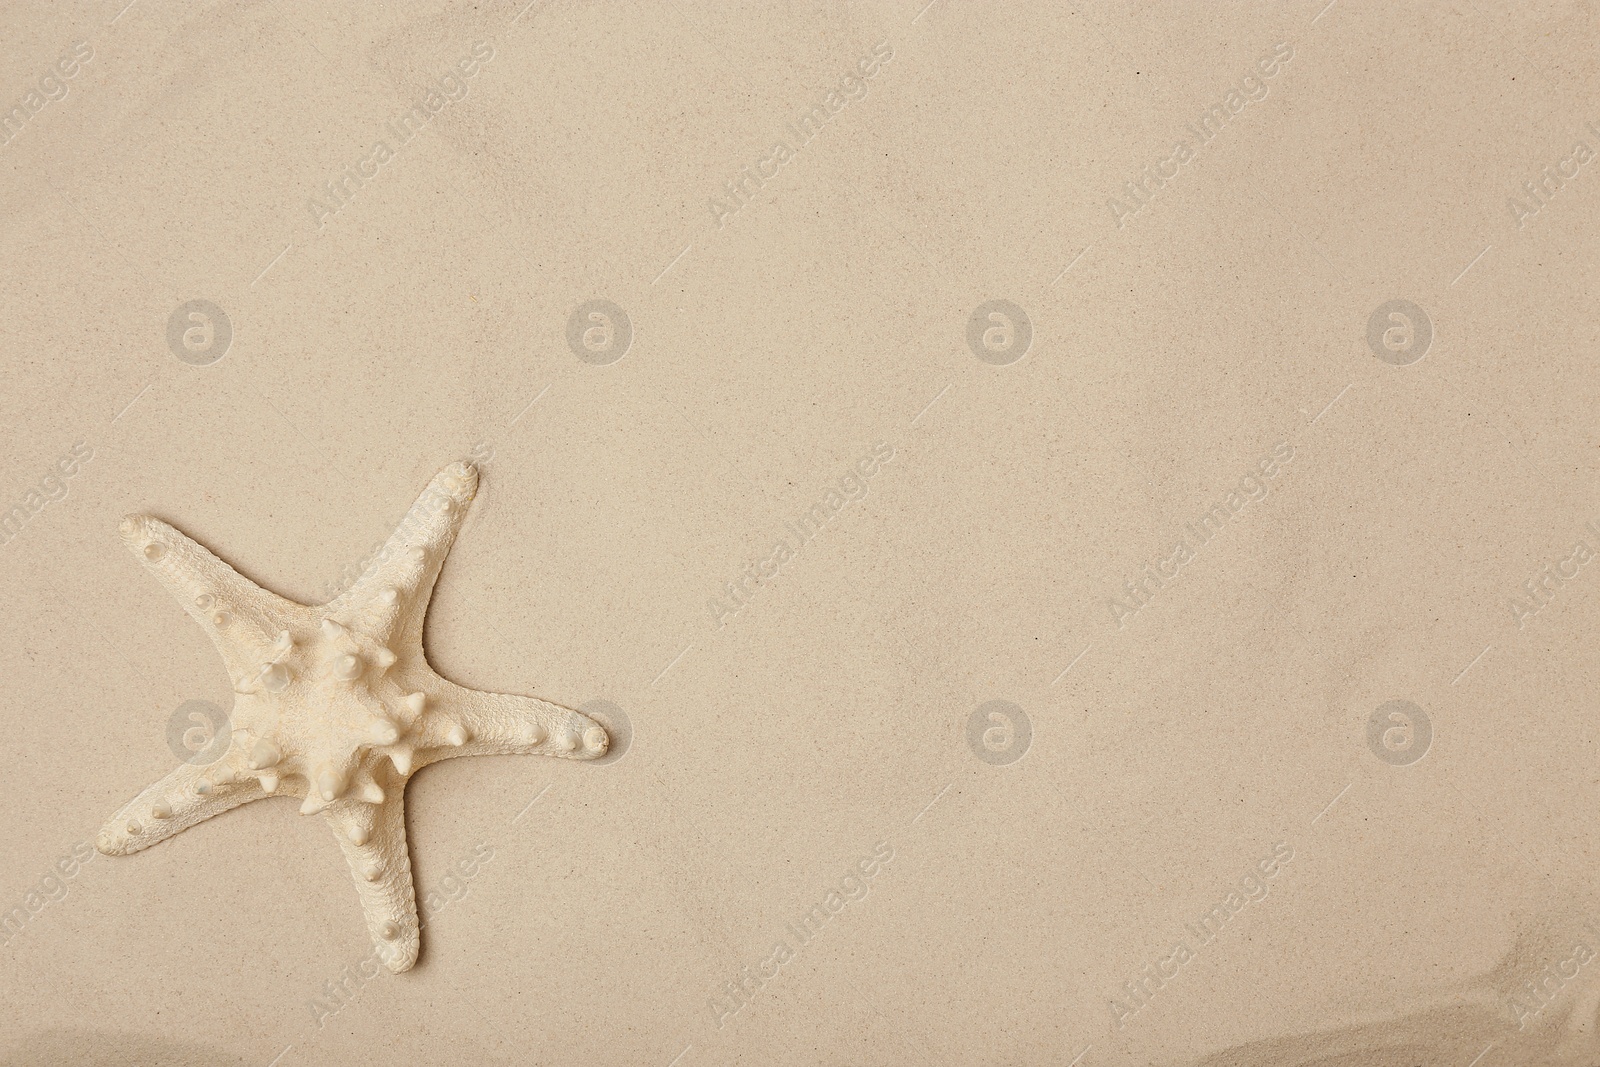 Photo of Starfish on beach sand, top view with space for text